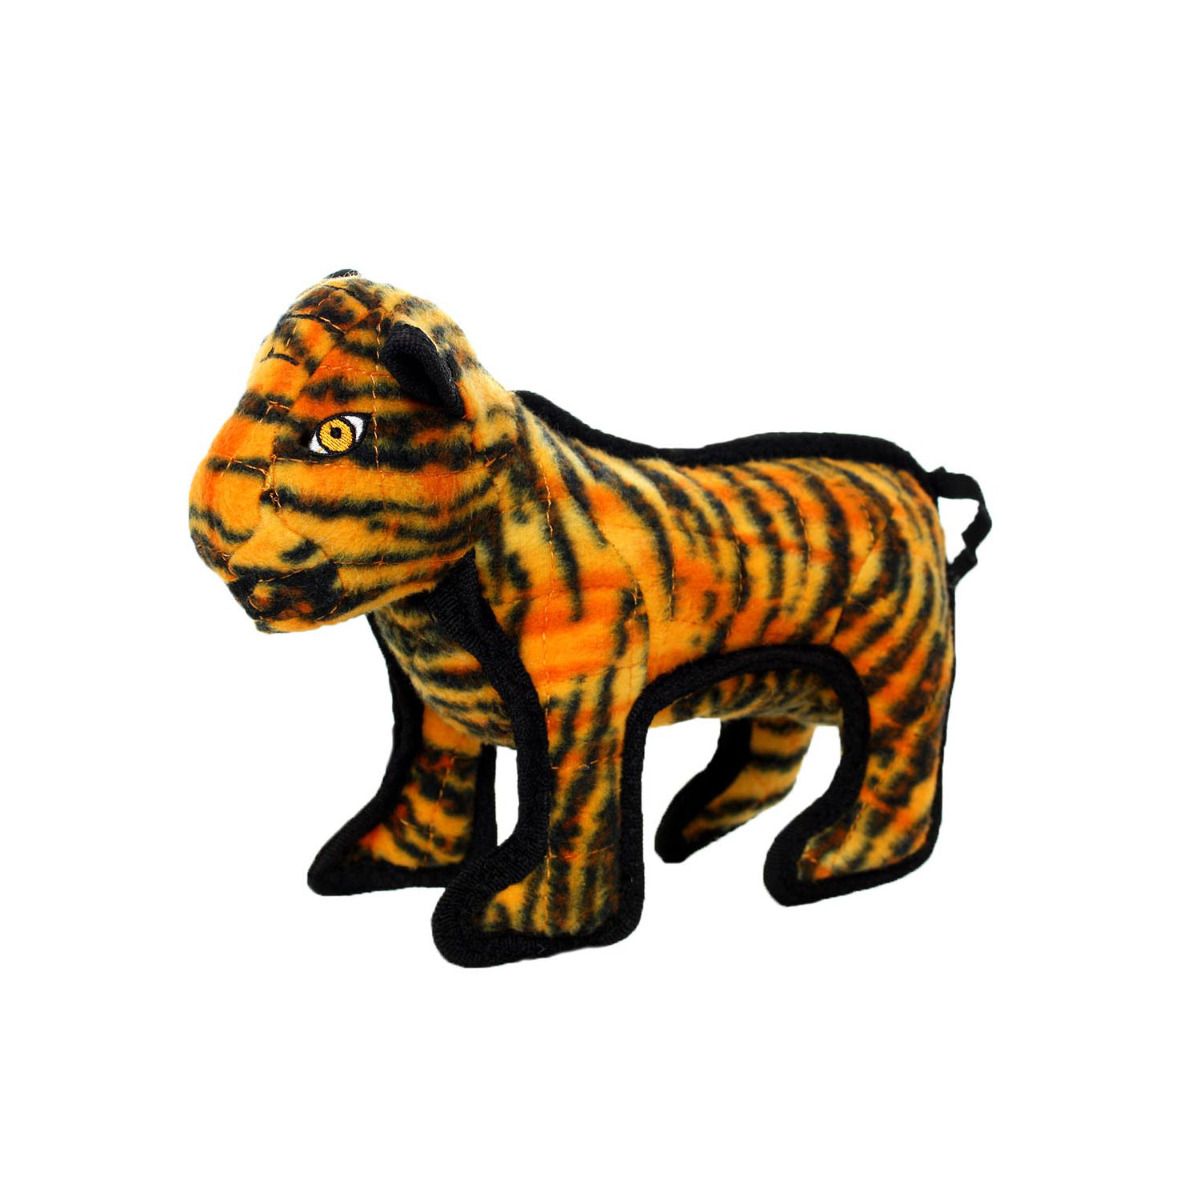 Tuffy Tatters the Tiger Zoo Series Plush Dog Toy, Junior